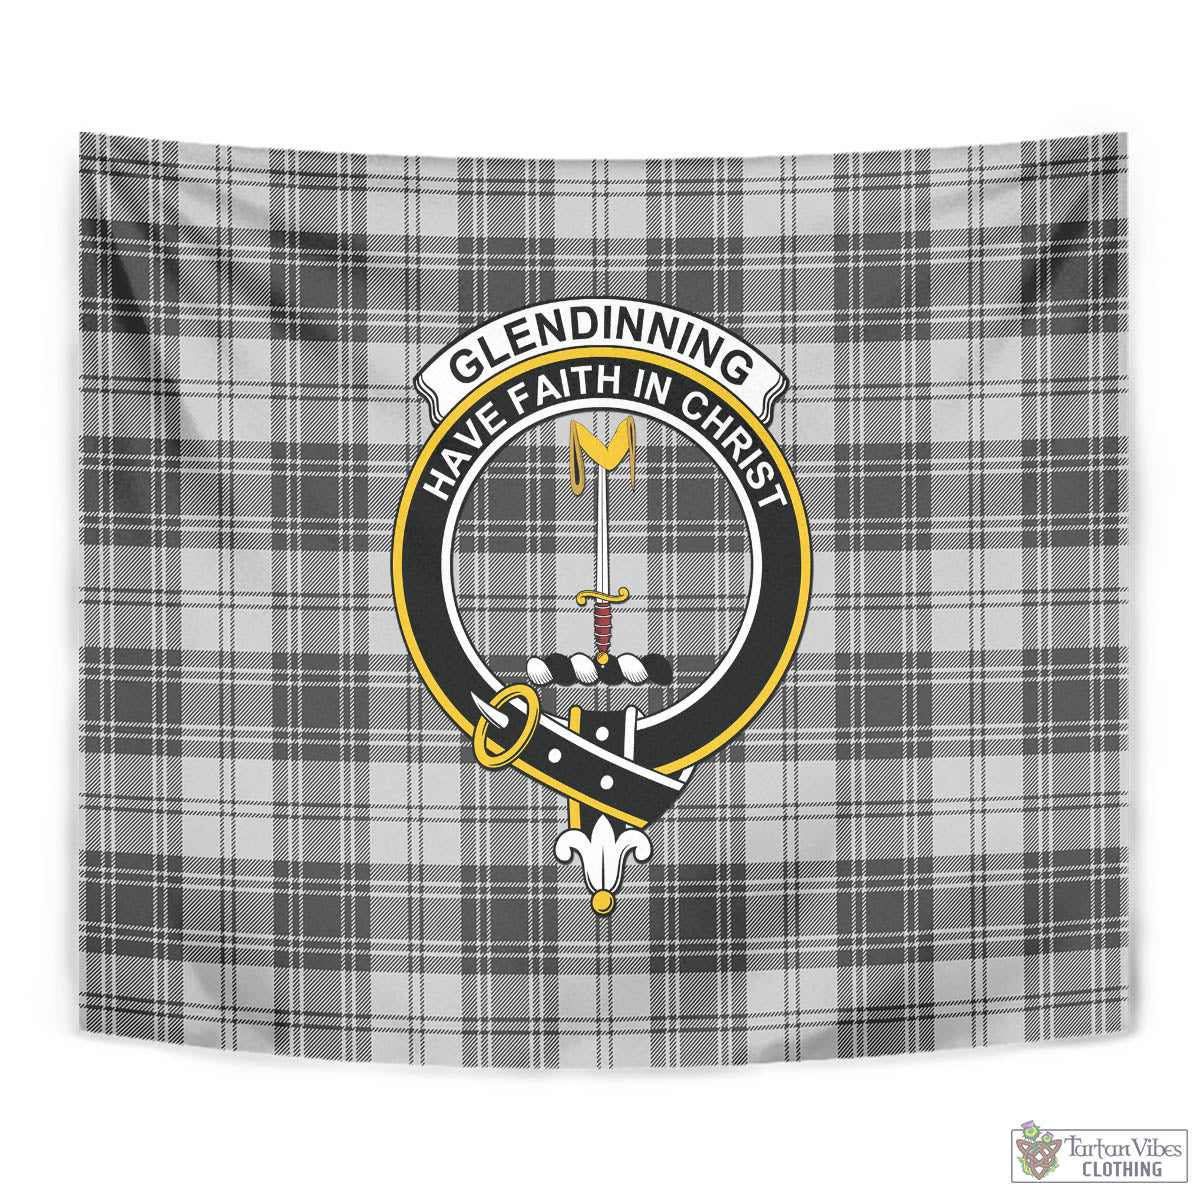 Tartan Vibes Clothing Glendinning Tartan Tapestry Wall Hanging and Home Decor for Room with Family Crest